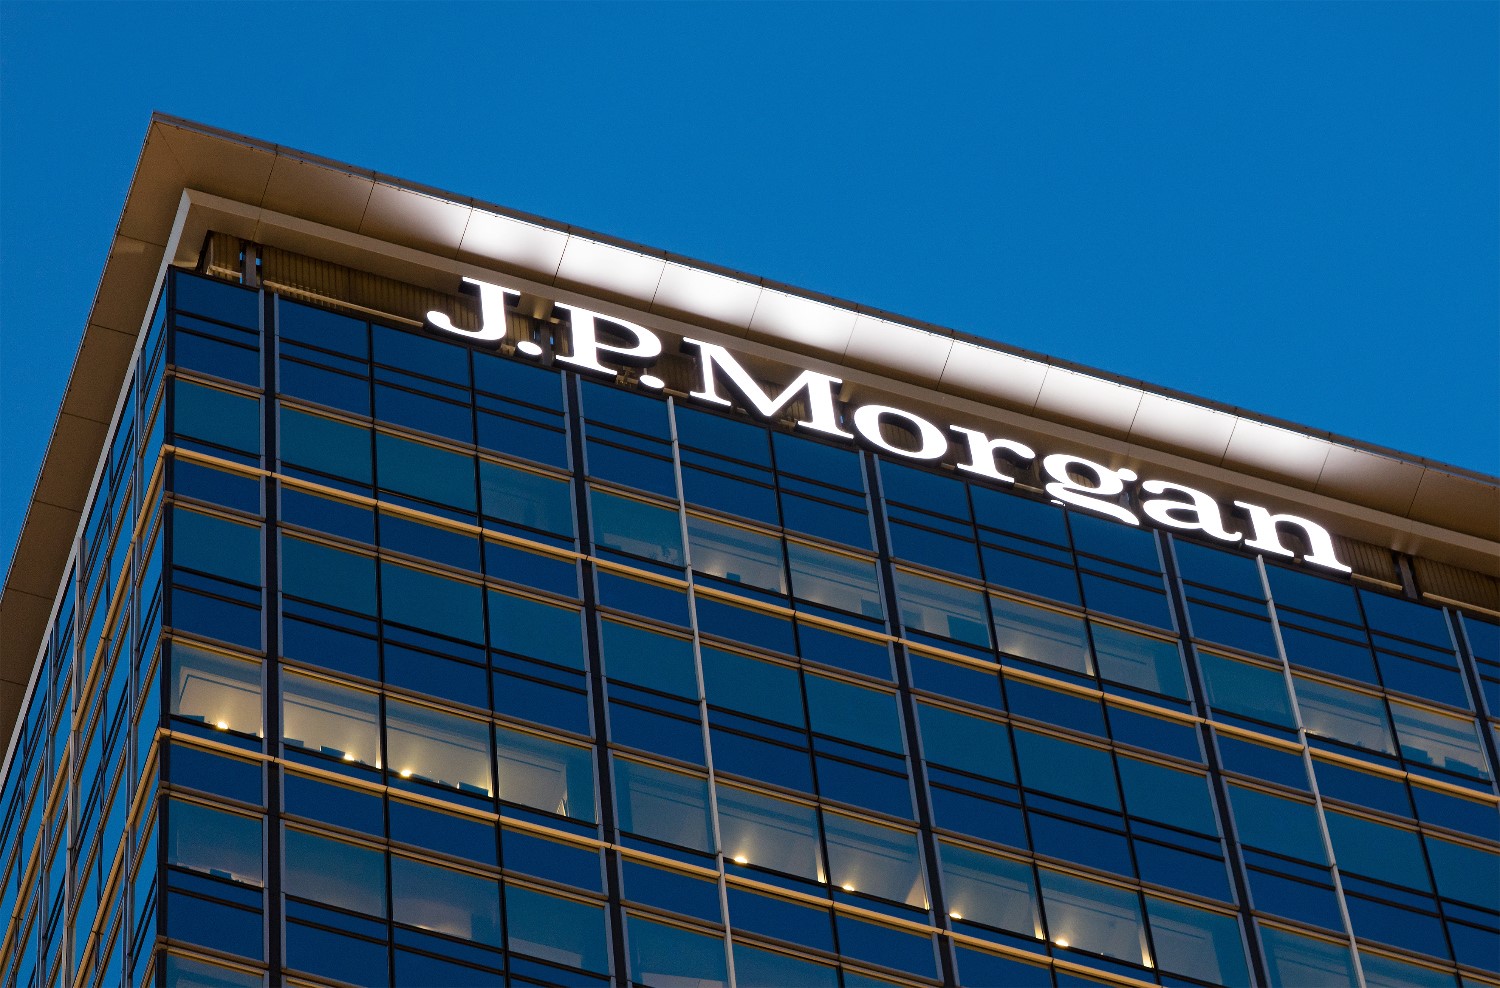 Cryptos Would Only Have Value in 'Dystopian' Economy: JPMorgan